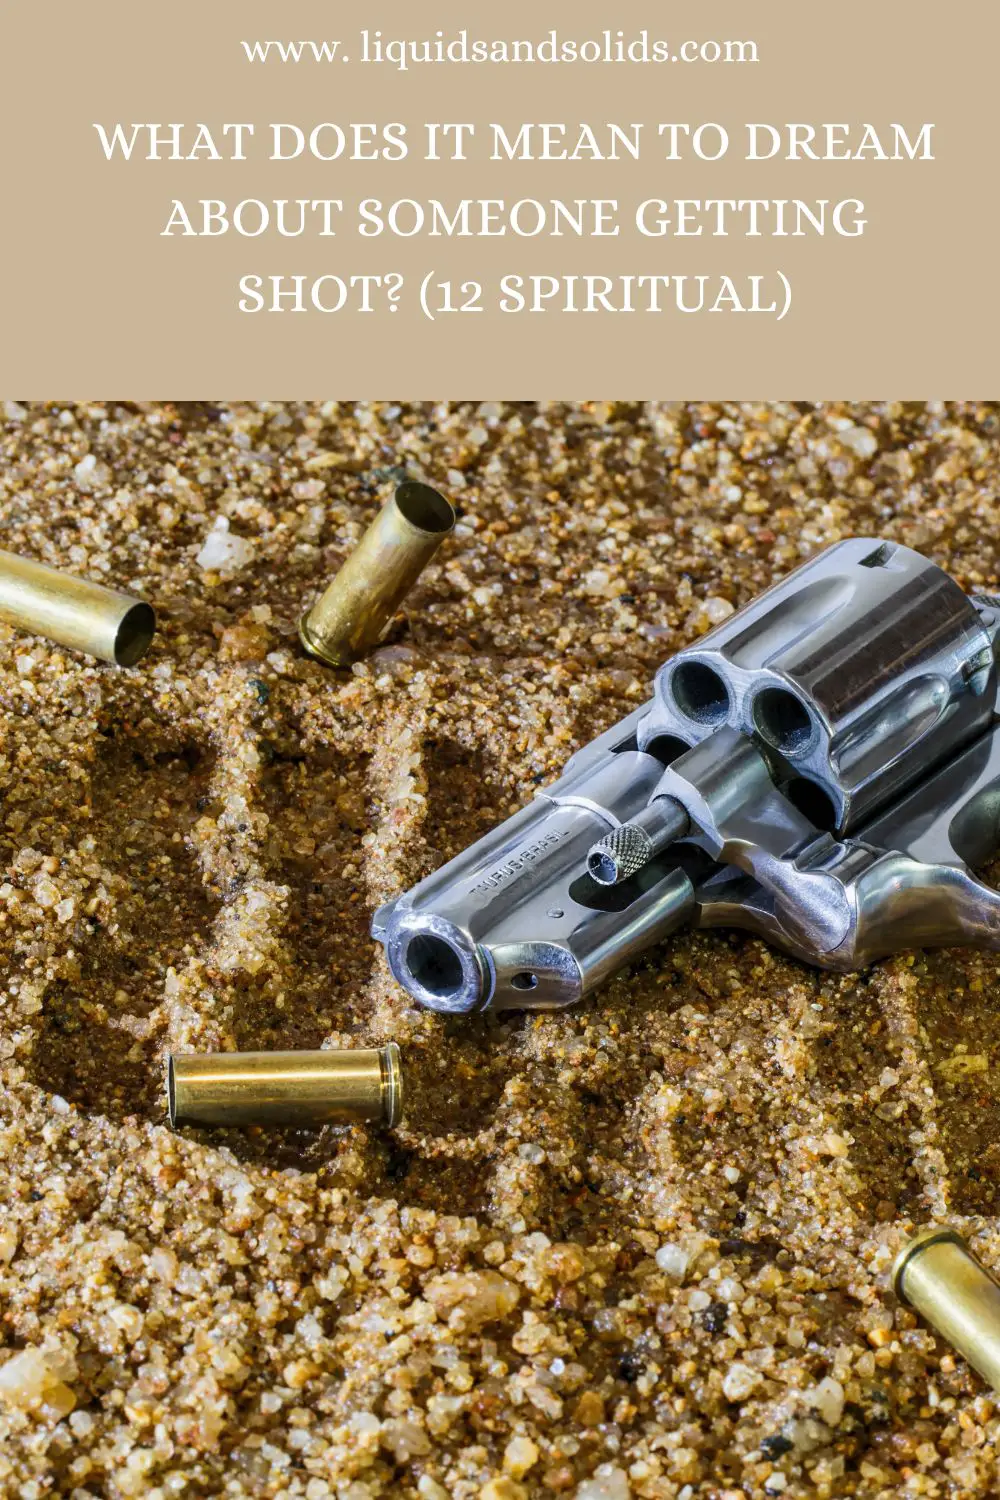 What Is The Spiritual Meaning Of Dreams About Shooting Bad Guys?